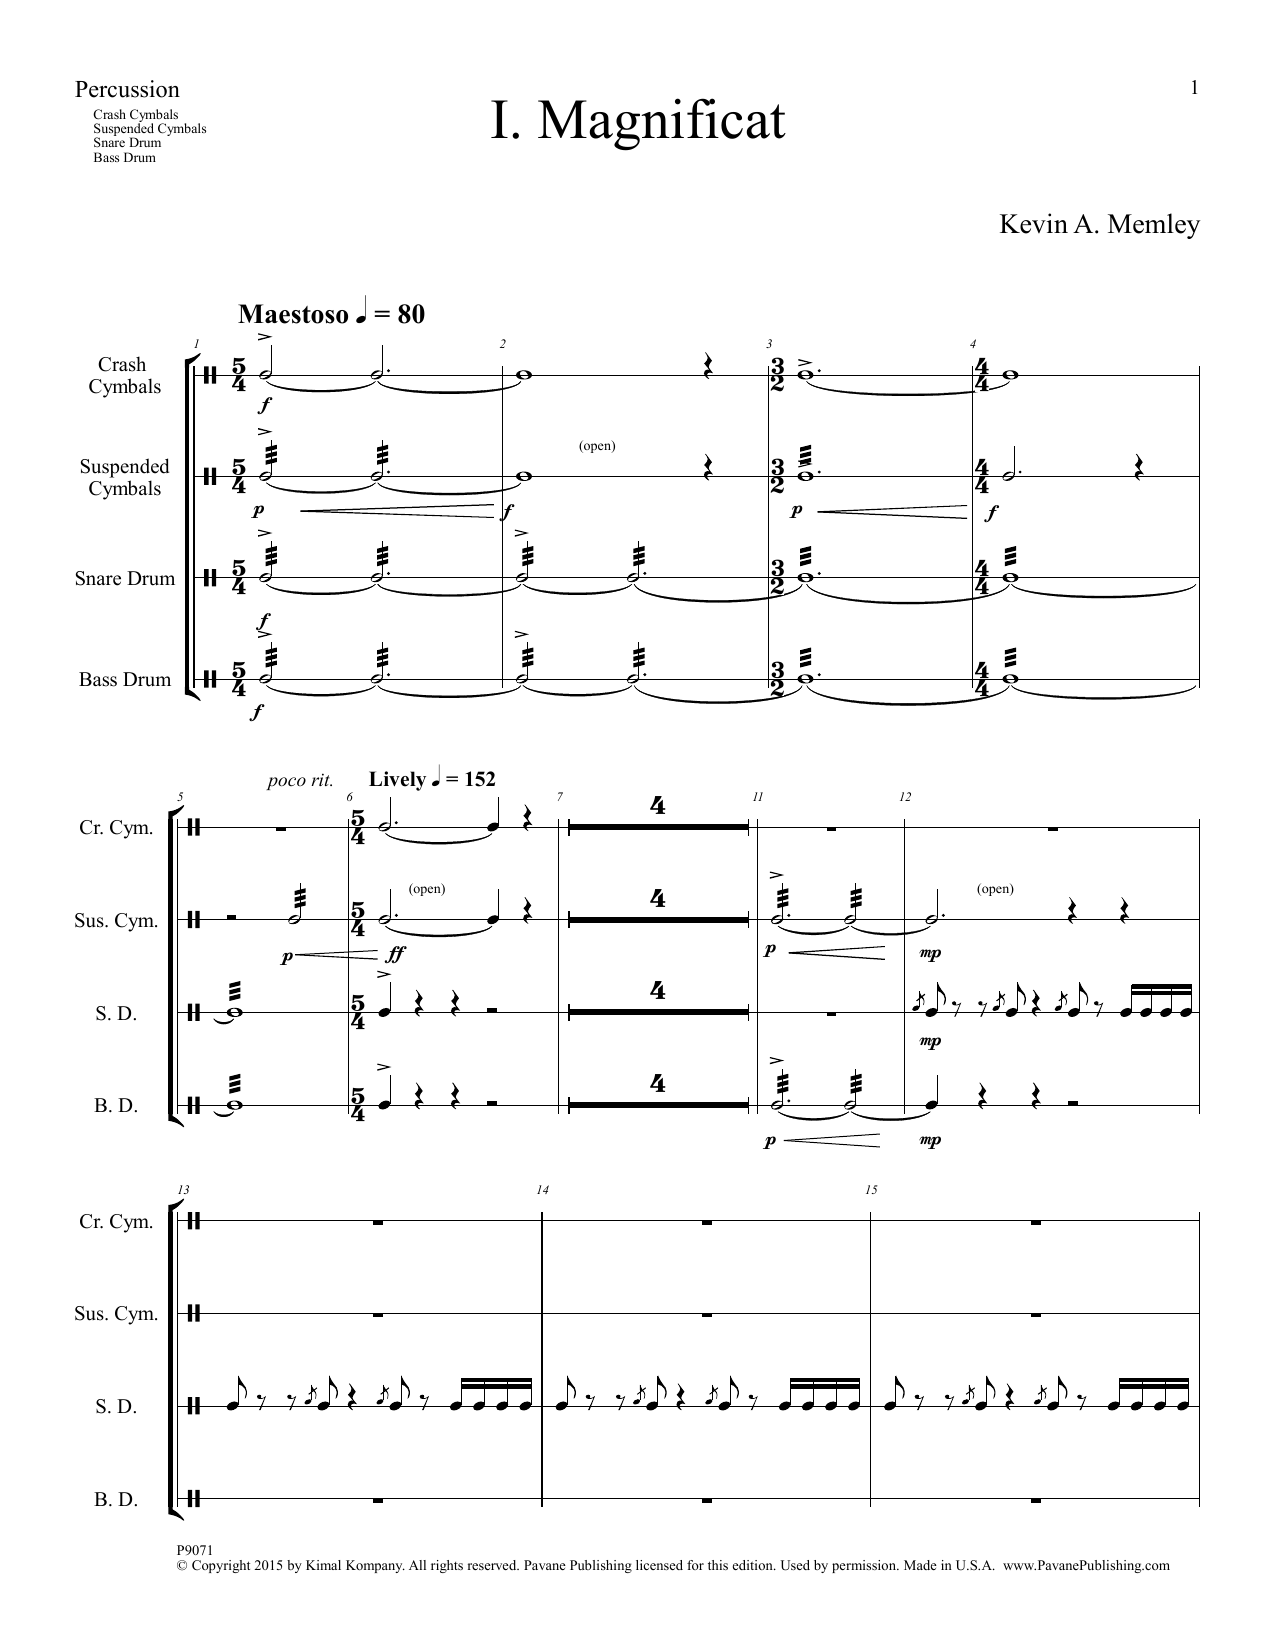 Download Kevin A. Memley Magnificat - Percussion Sheet Music